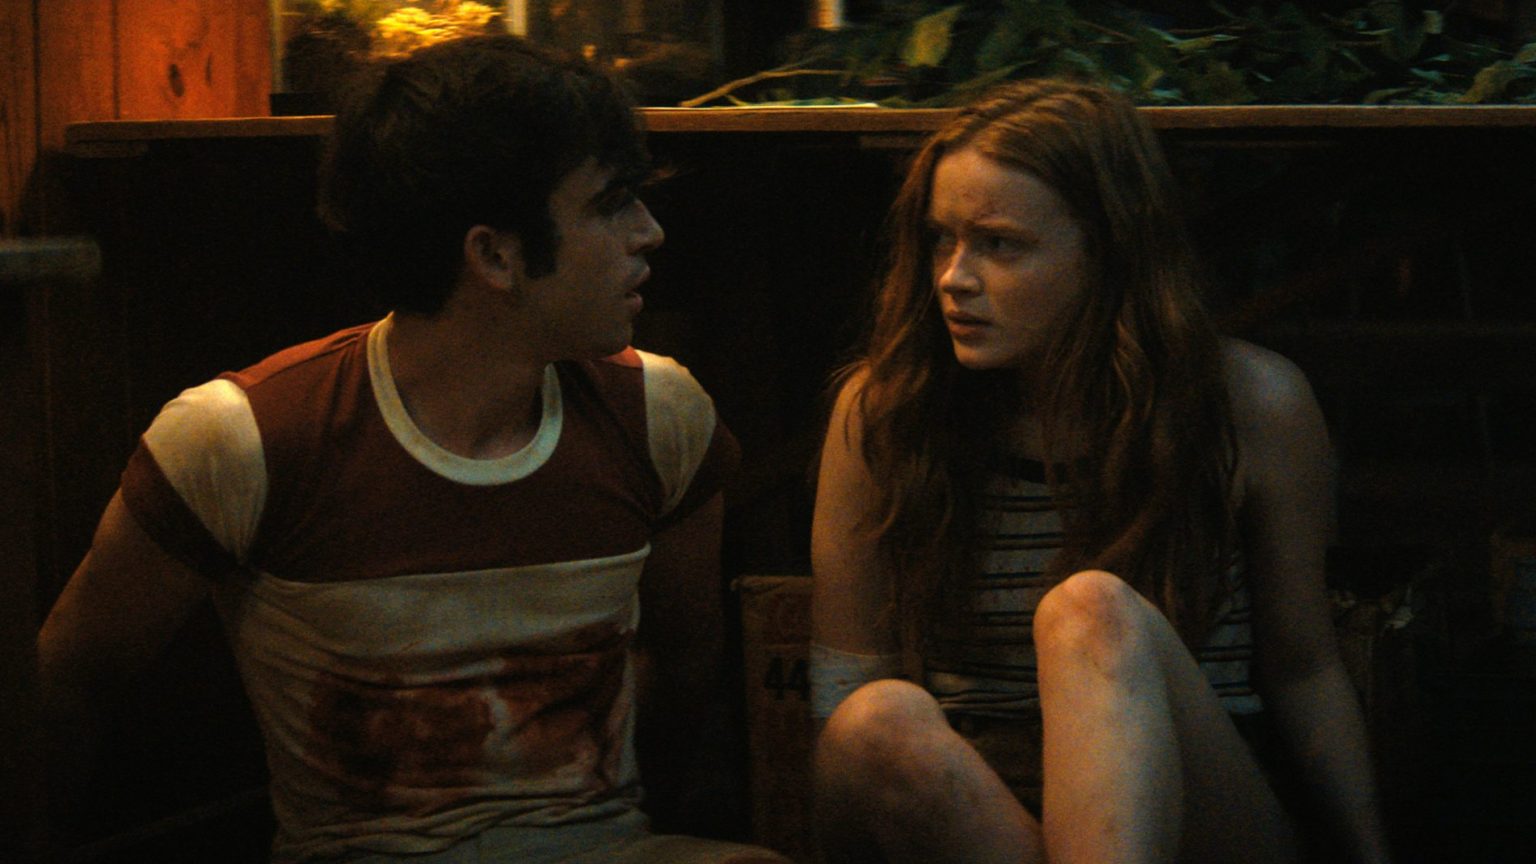 Ted Sutherland and Sadie Sink hiding together from a mysterious killer as seen in the Netflix original Horror movie FEAR STREET PART TWO: 1978